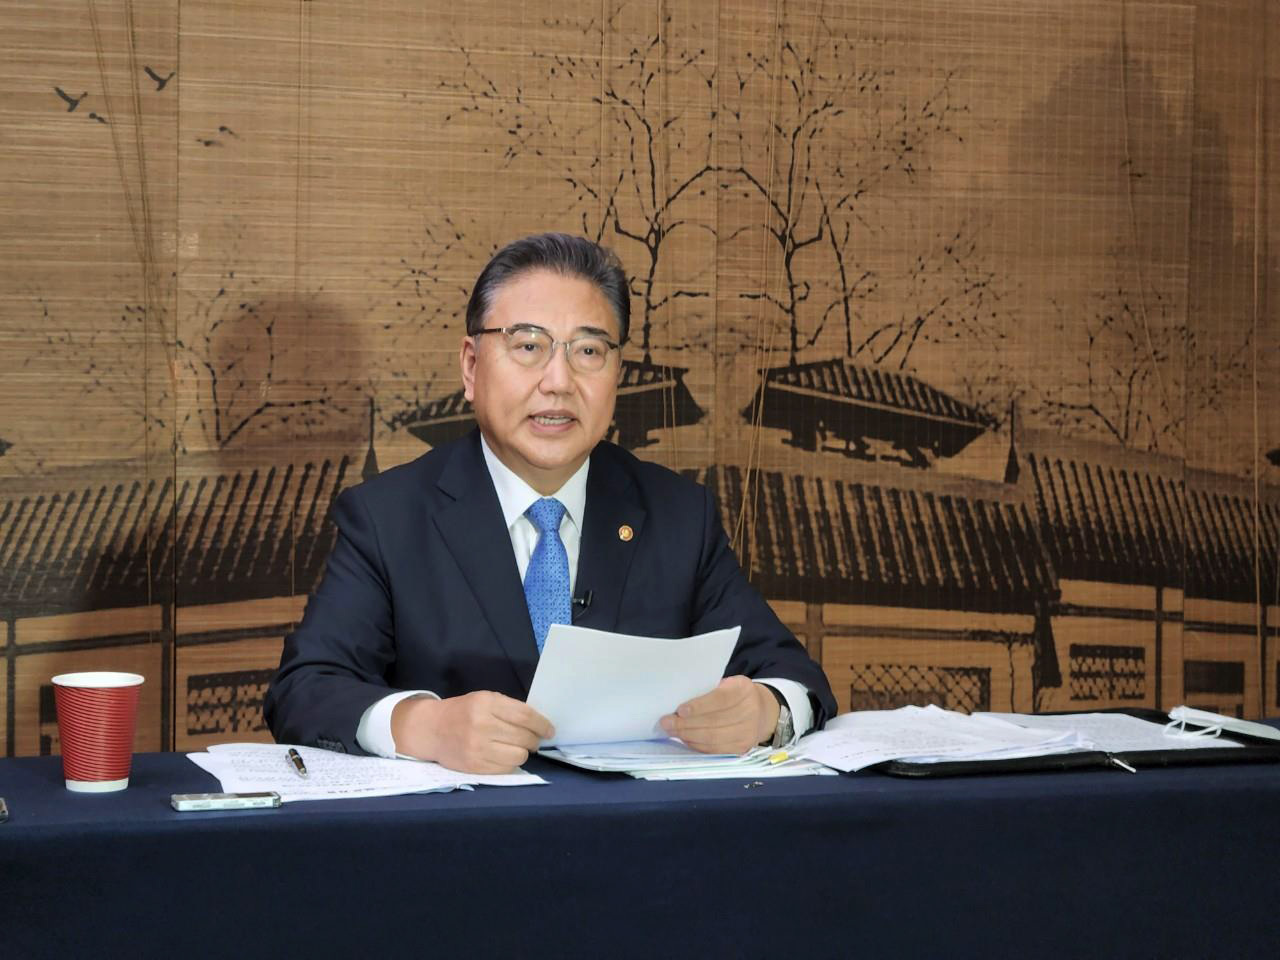 South Korean Foreign Minister Park Jin speaks at a press conference on his bilateral meeting with his Chinese counterpart Wang Yi in Qingdao, China on Wednesday. (Yonhap)